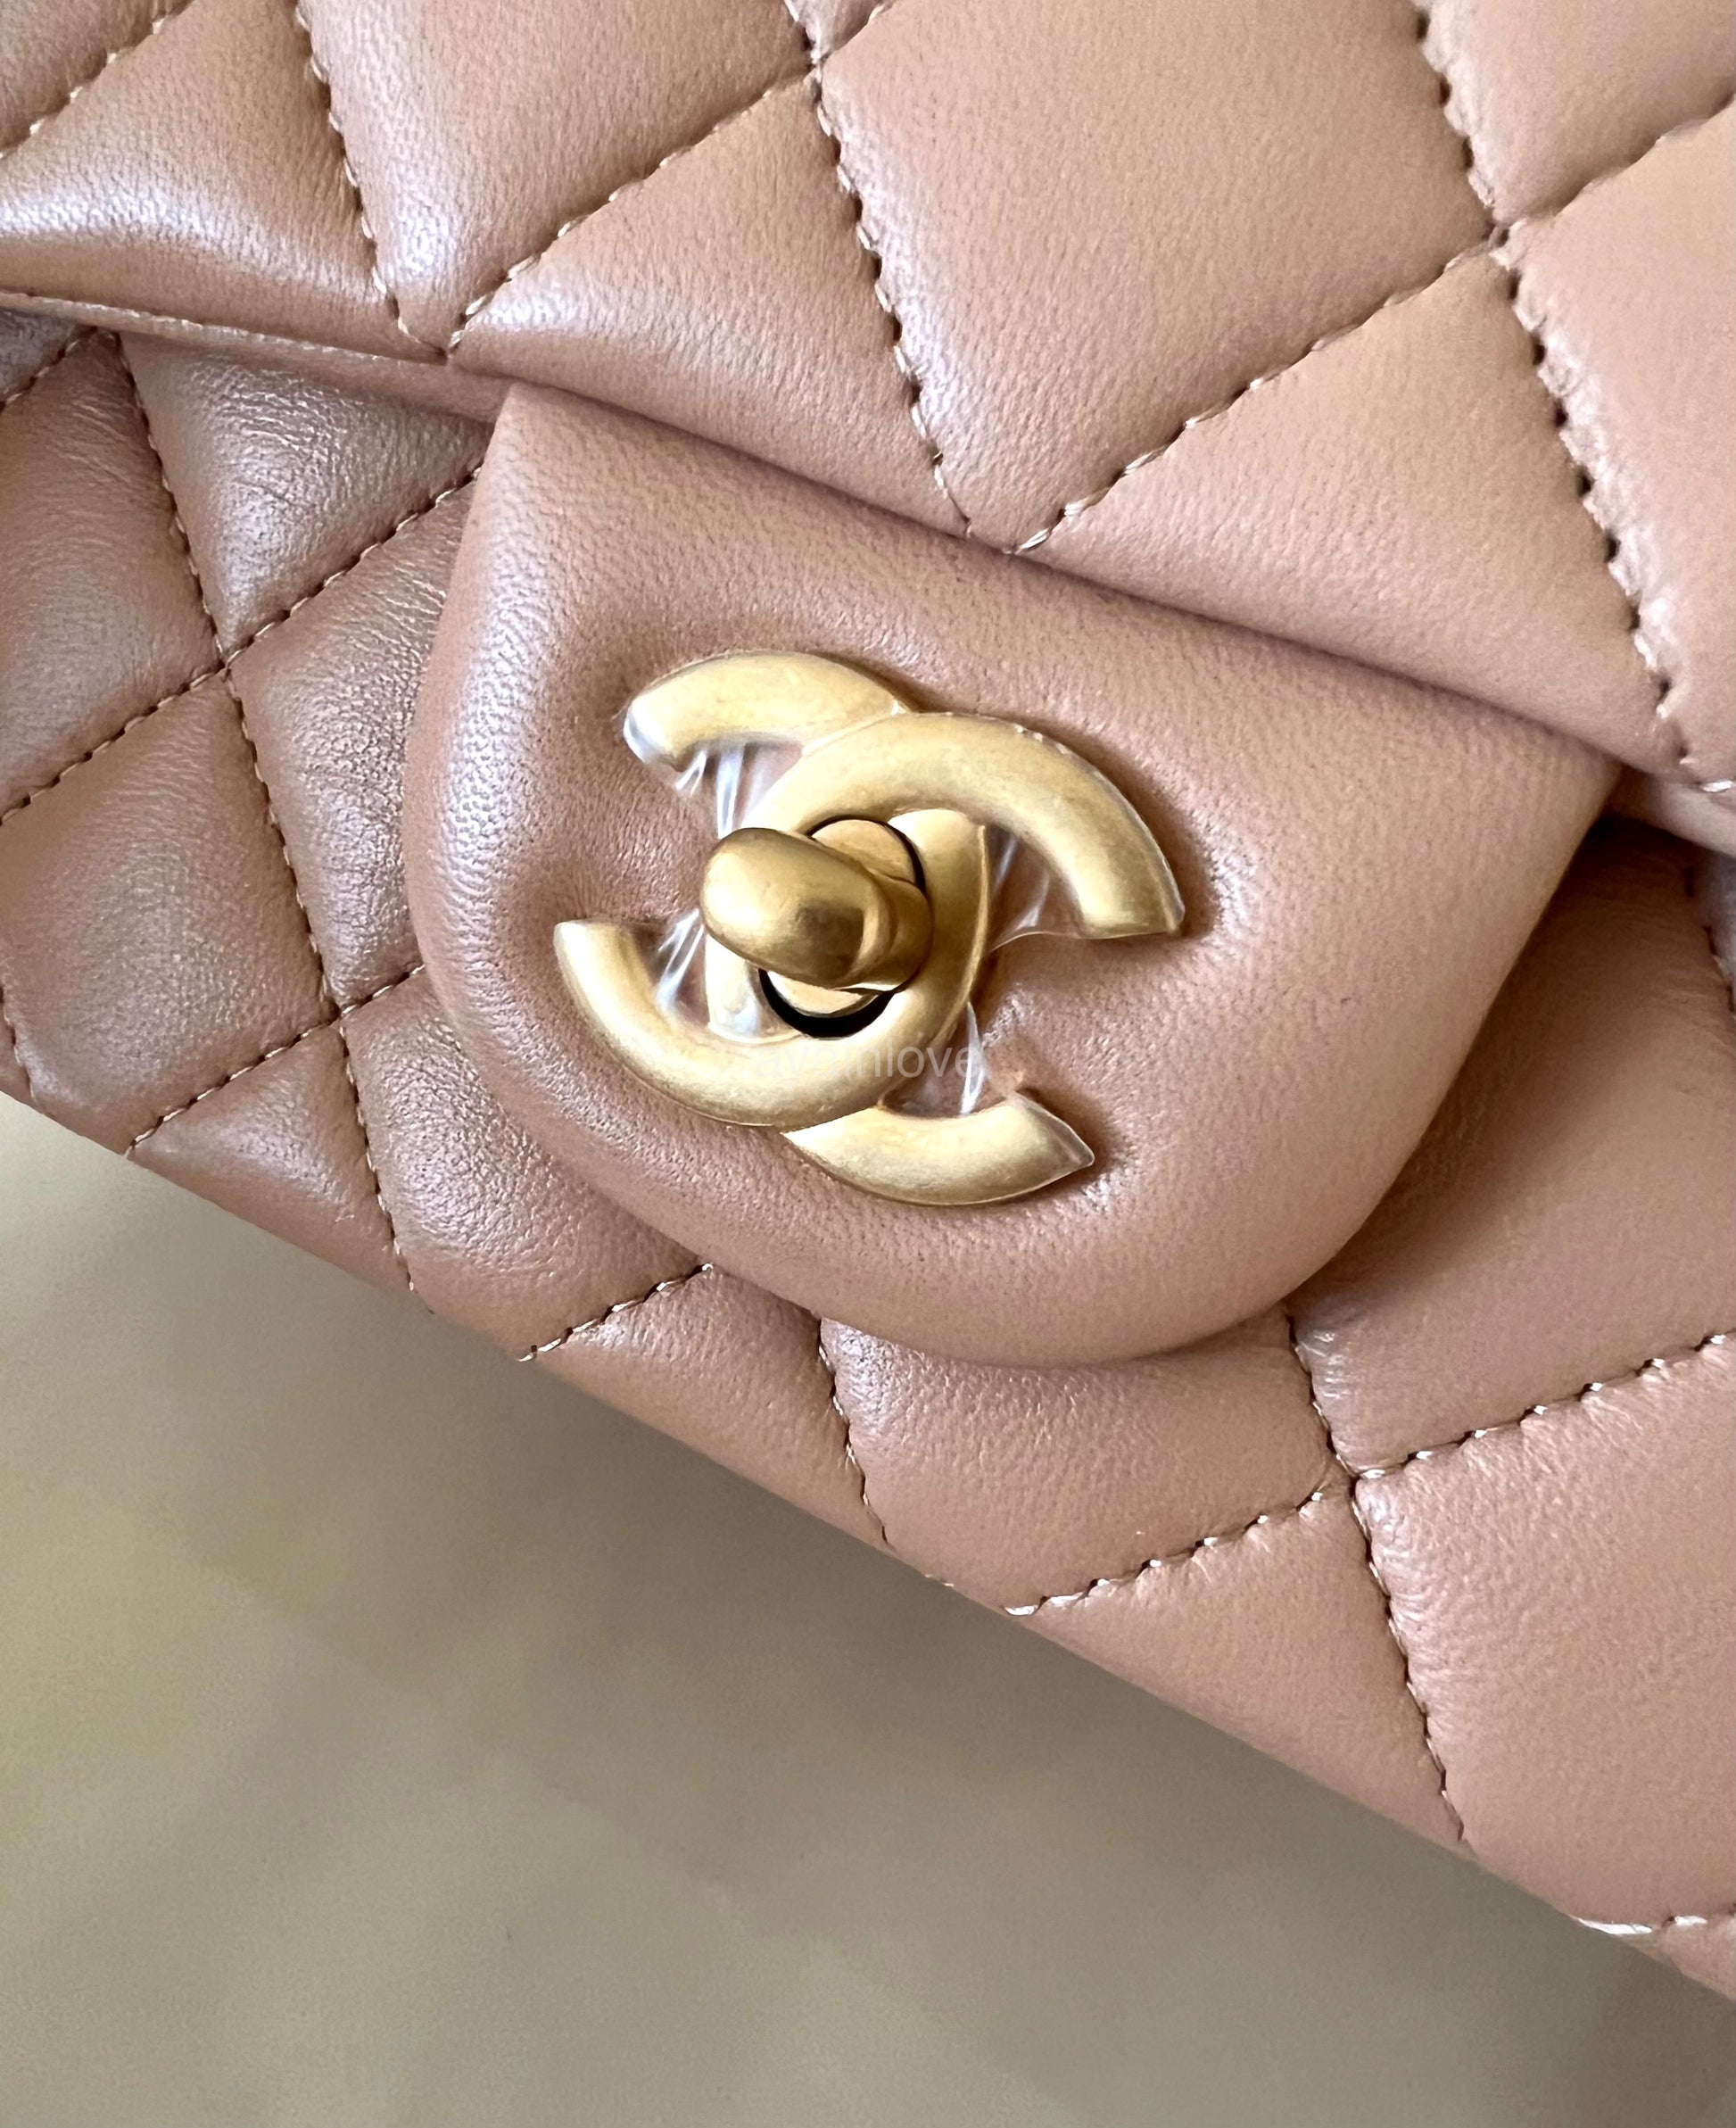 CHANEL Beige Lamb Skin Microchipped Top Handle Mini Flap Bag Gold Hard – AYAINLOVE  CURATED LUXURIES